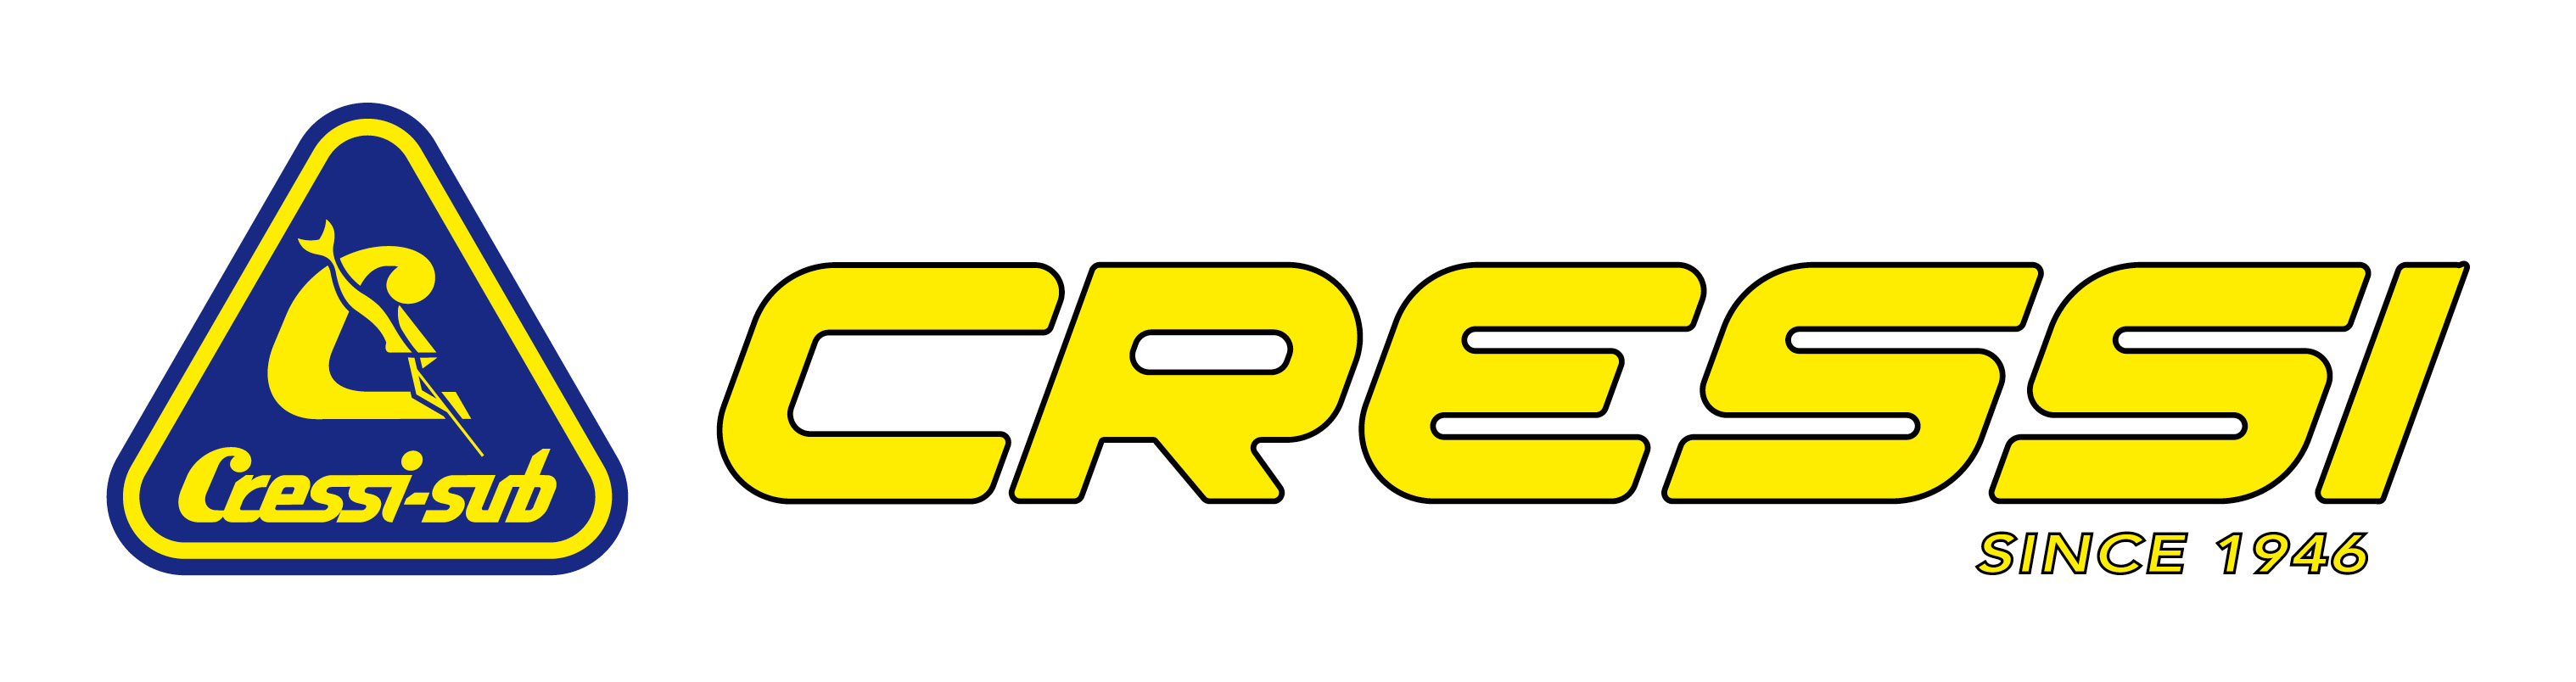 Cressi is a top of the line SCUBA diving brand carried here at Neptune Diving and Ski Shop in Nashville, TN.